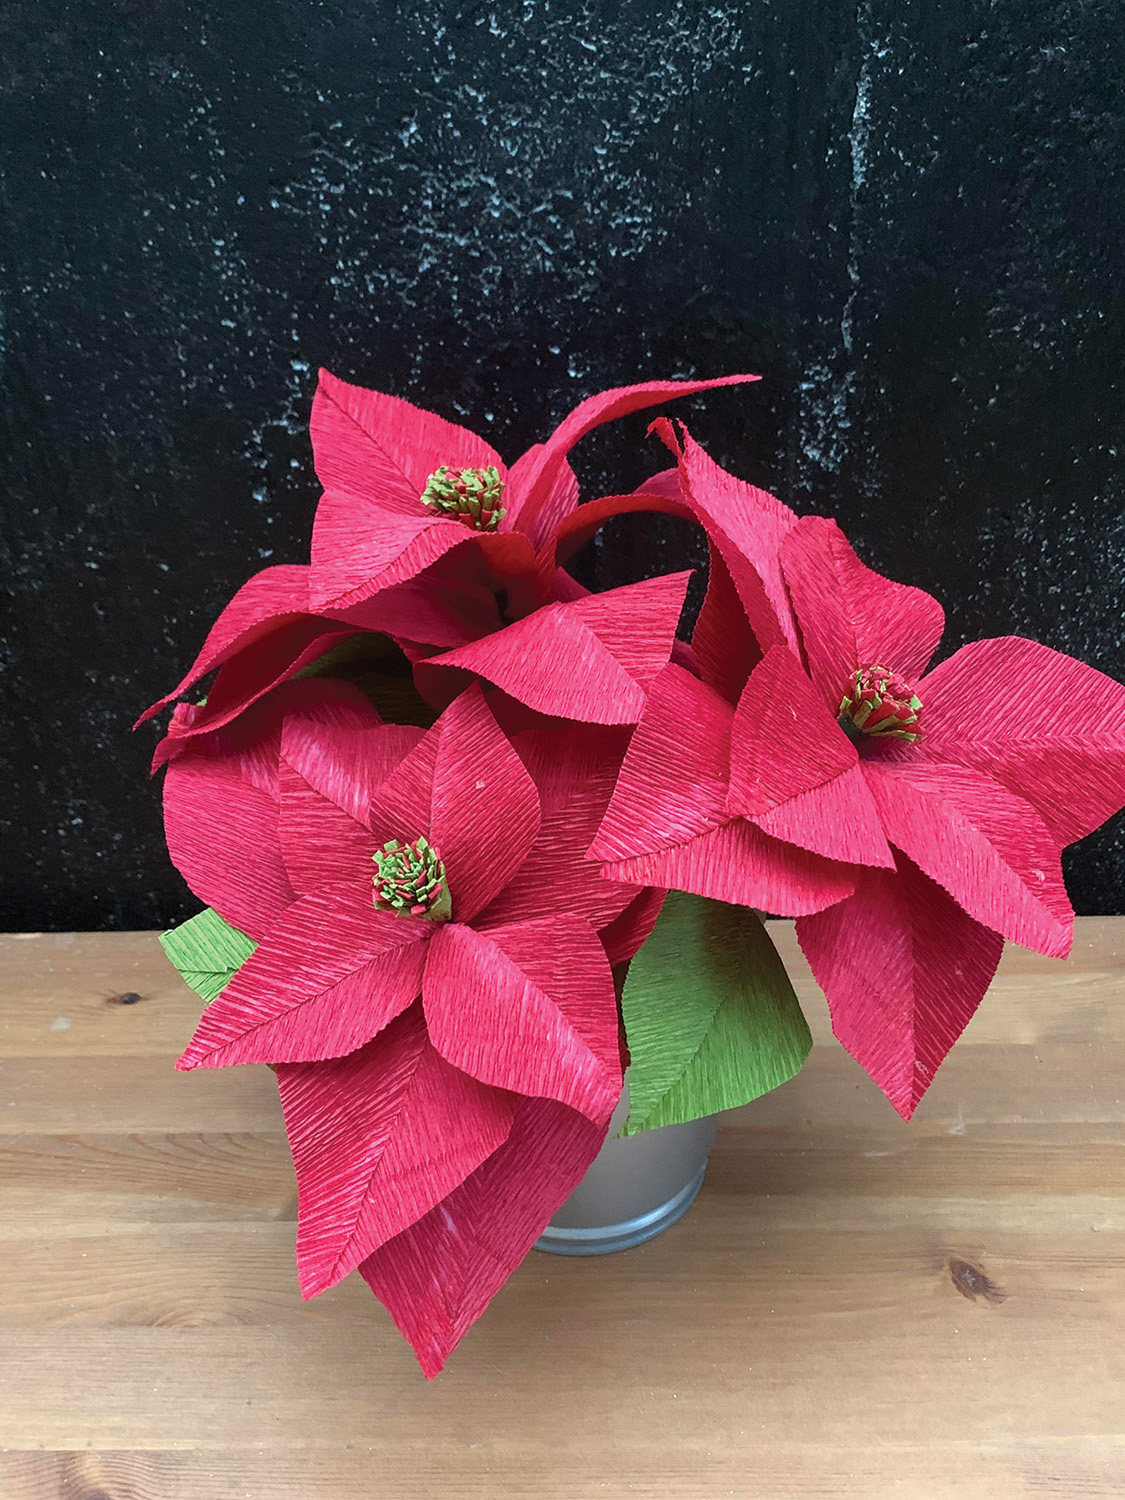 Image of the craft featuring a red poinsettia plant made from crepe paper